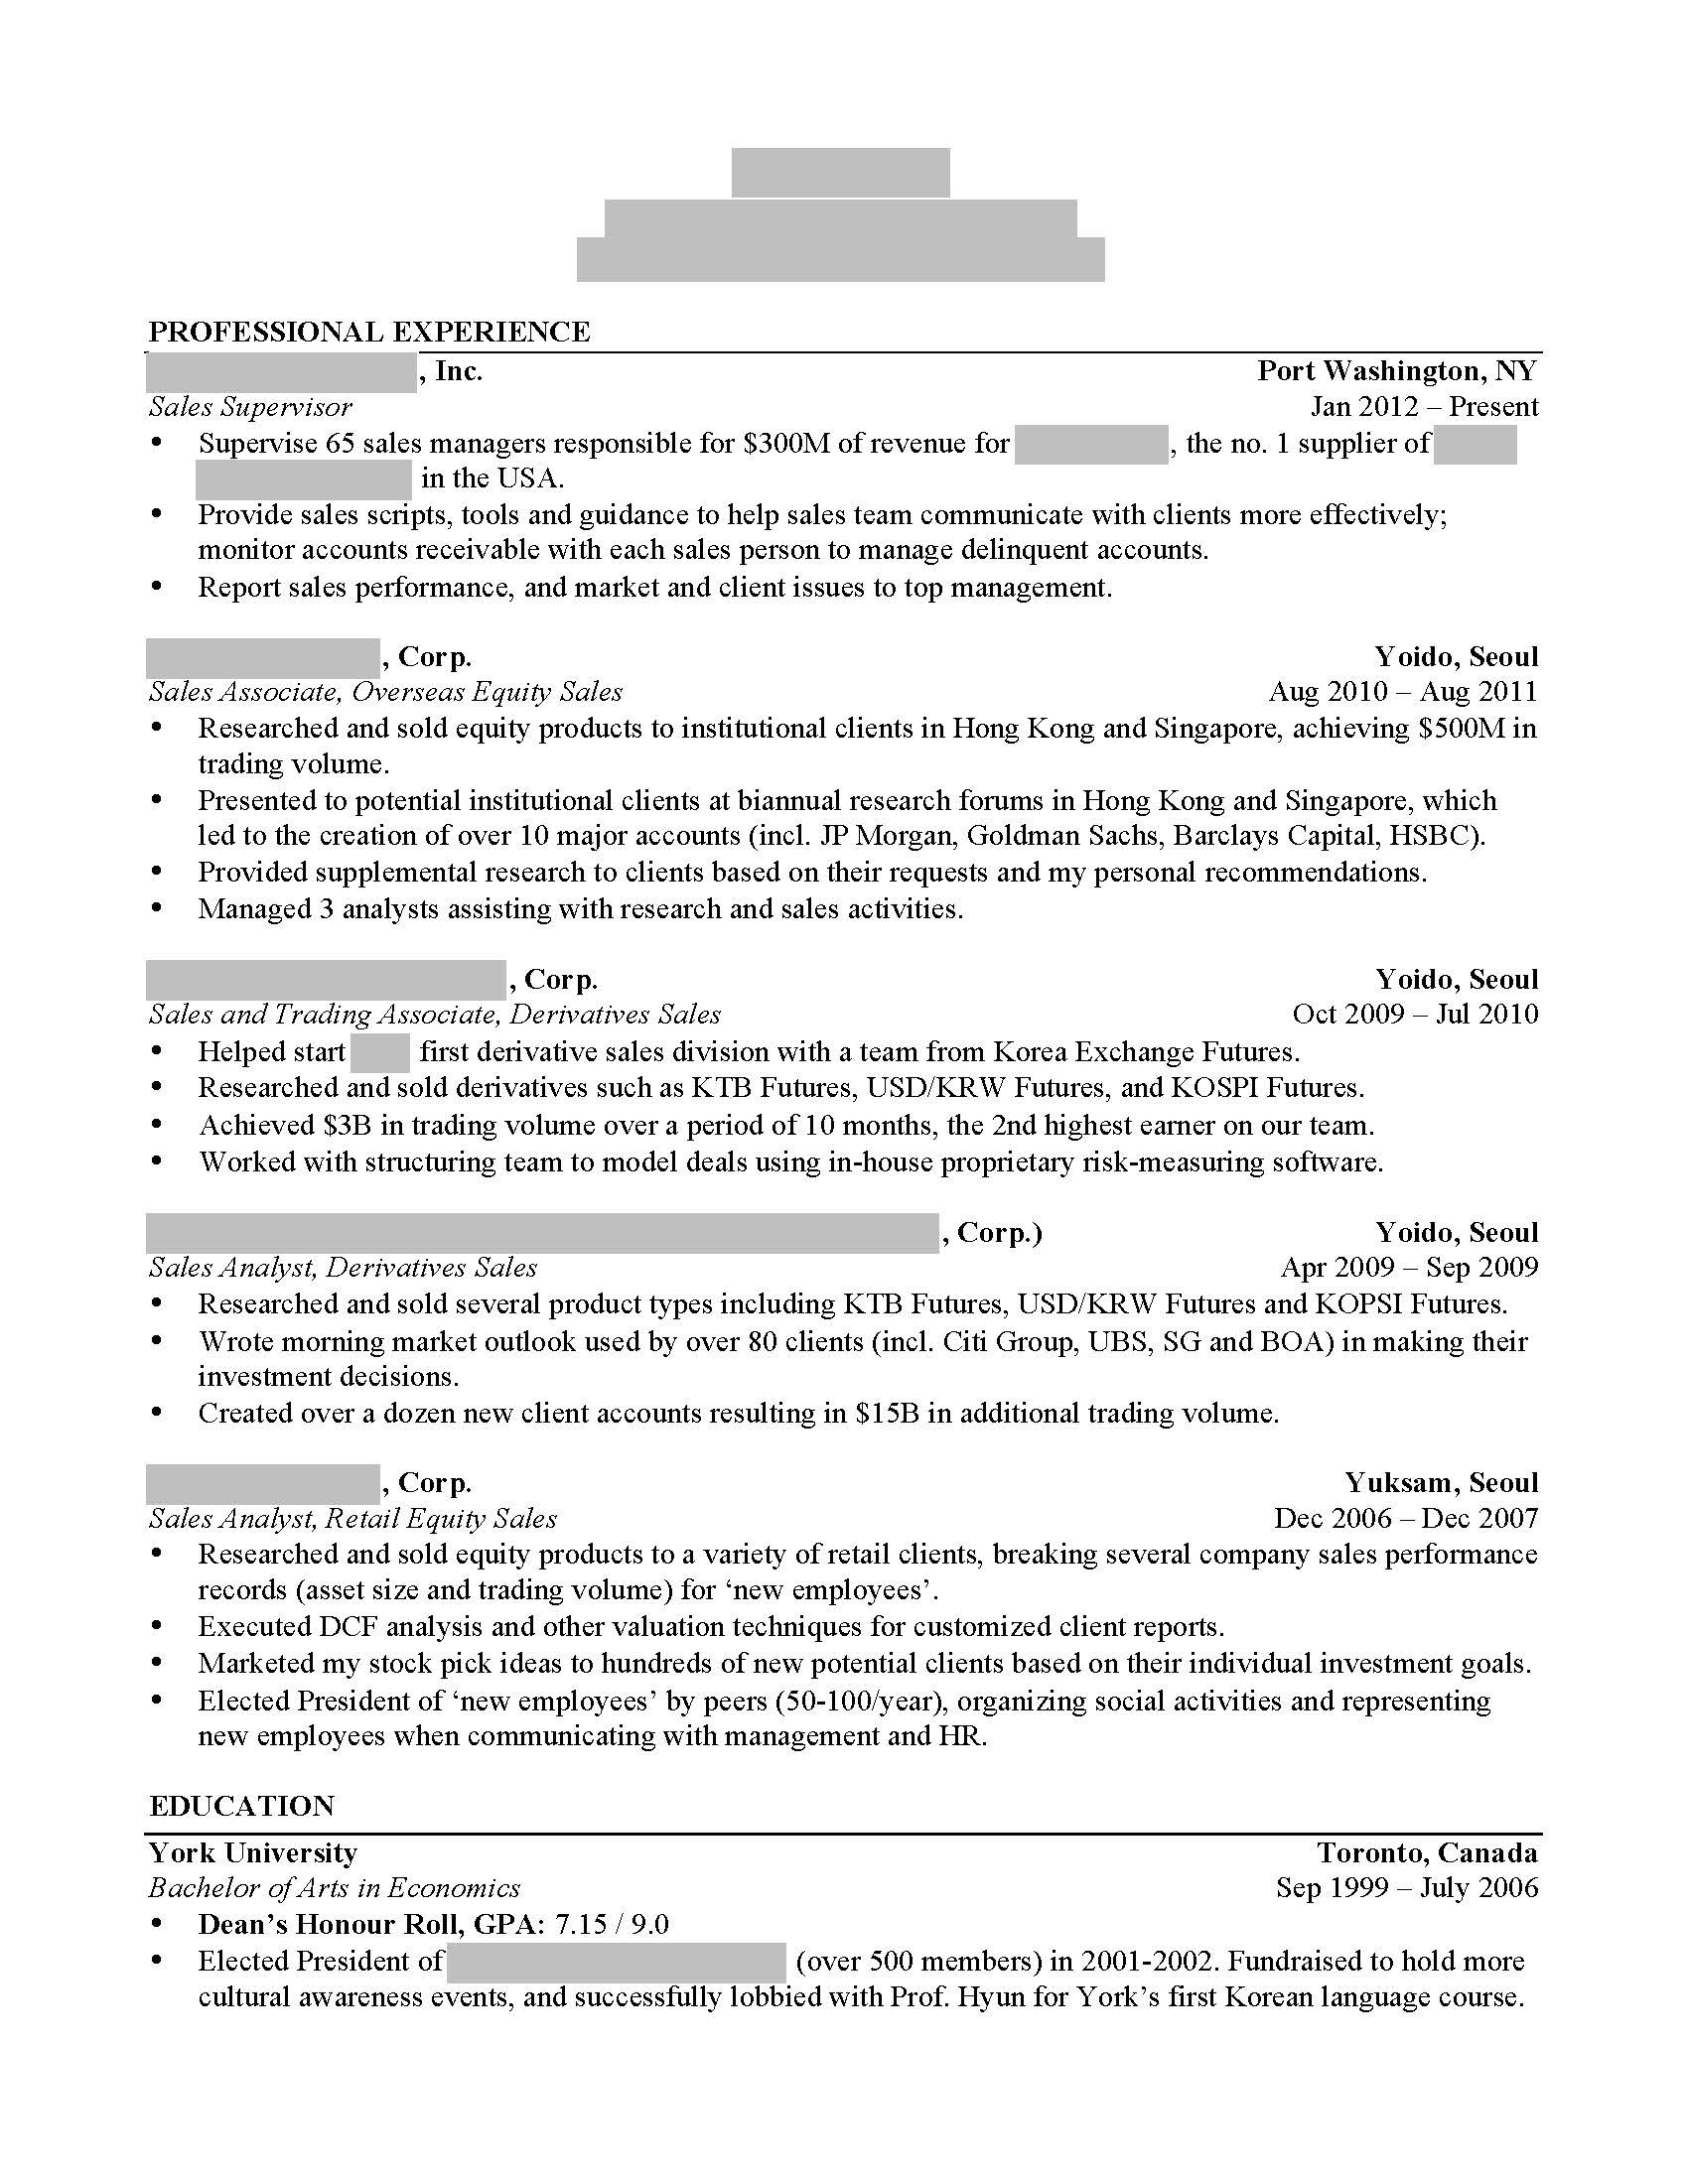 Kenan Flagler Business School Resume Template 6: 7 Deadly Sins Of Mba Resumes – Â» touch Mba